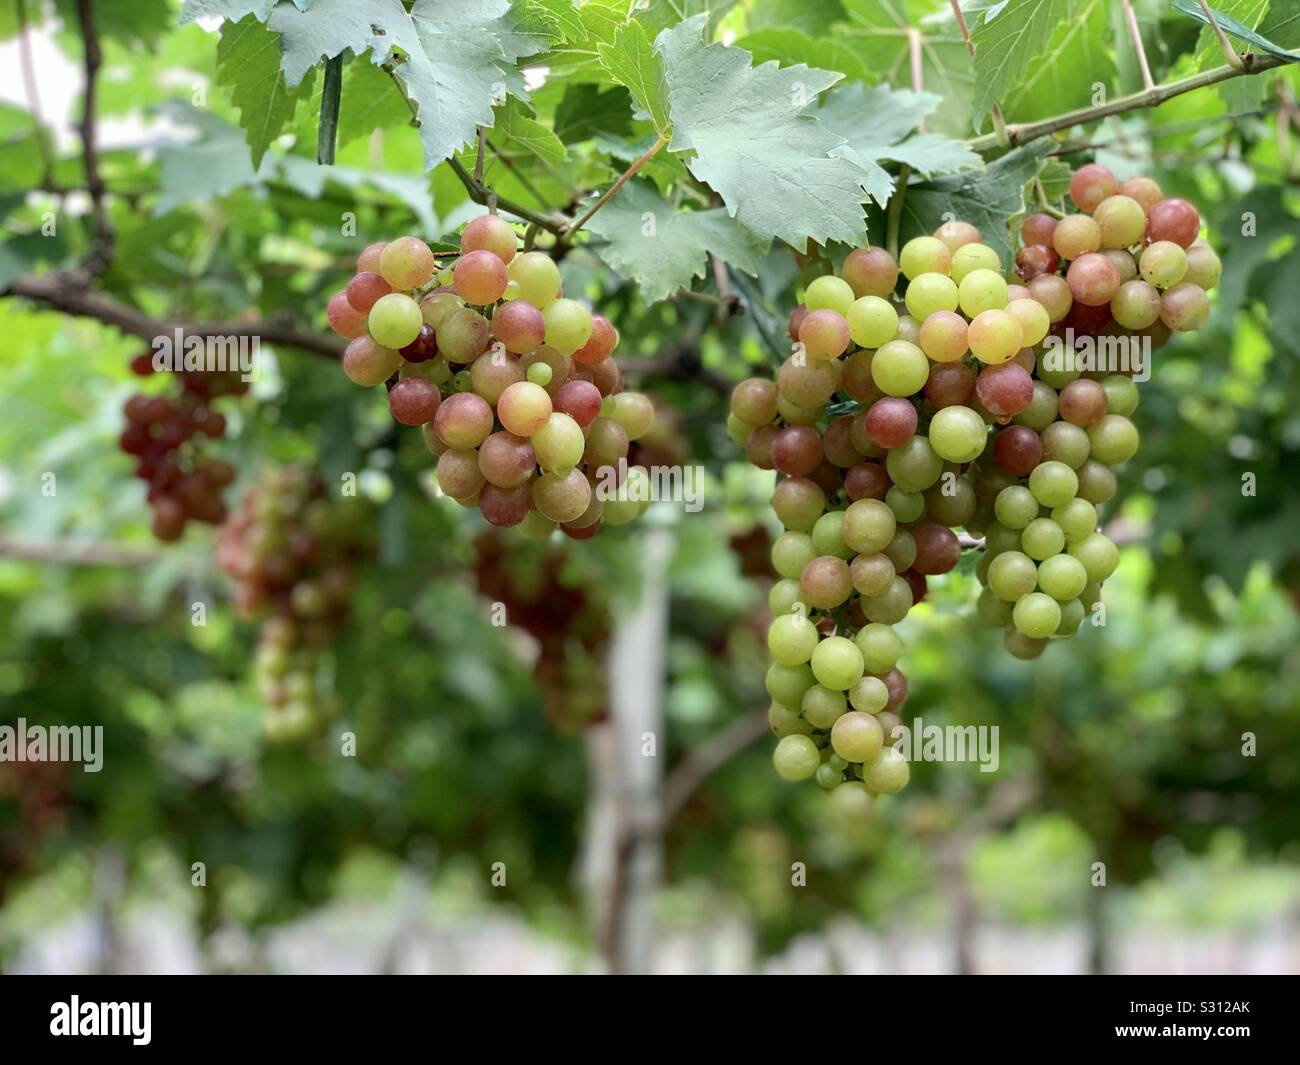 Grape farm in La Union, Philippines. It’s lovely to see the transition of colors from green to purple. Stock Photo